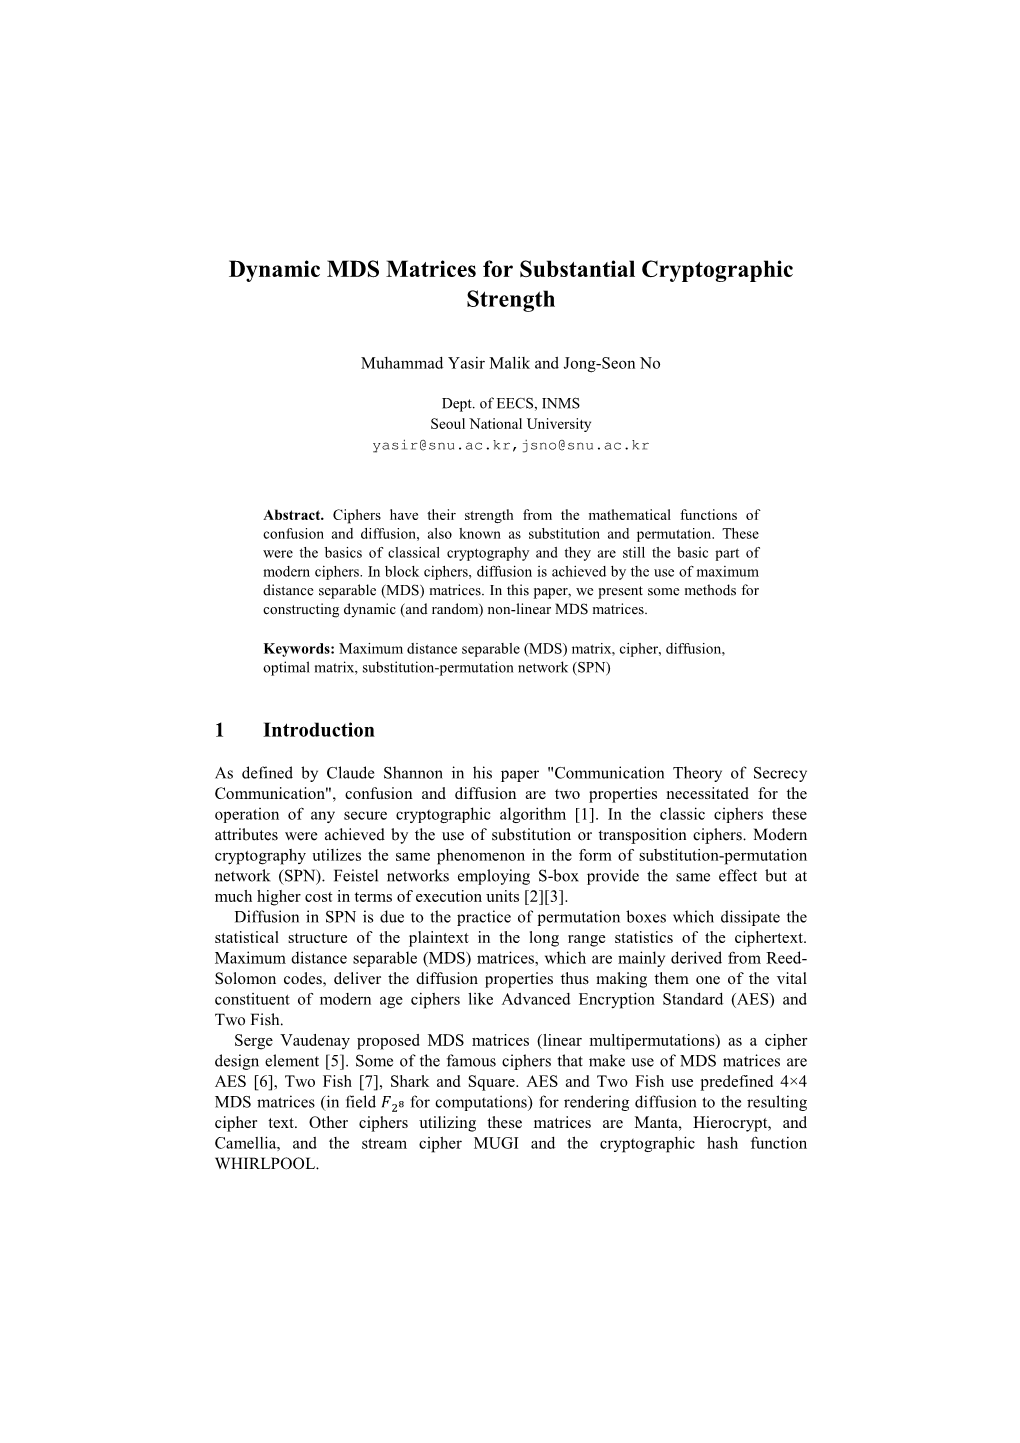 Dynamic MDS Matrices for Substantial Cryptographic Strength